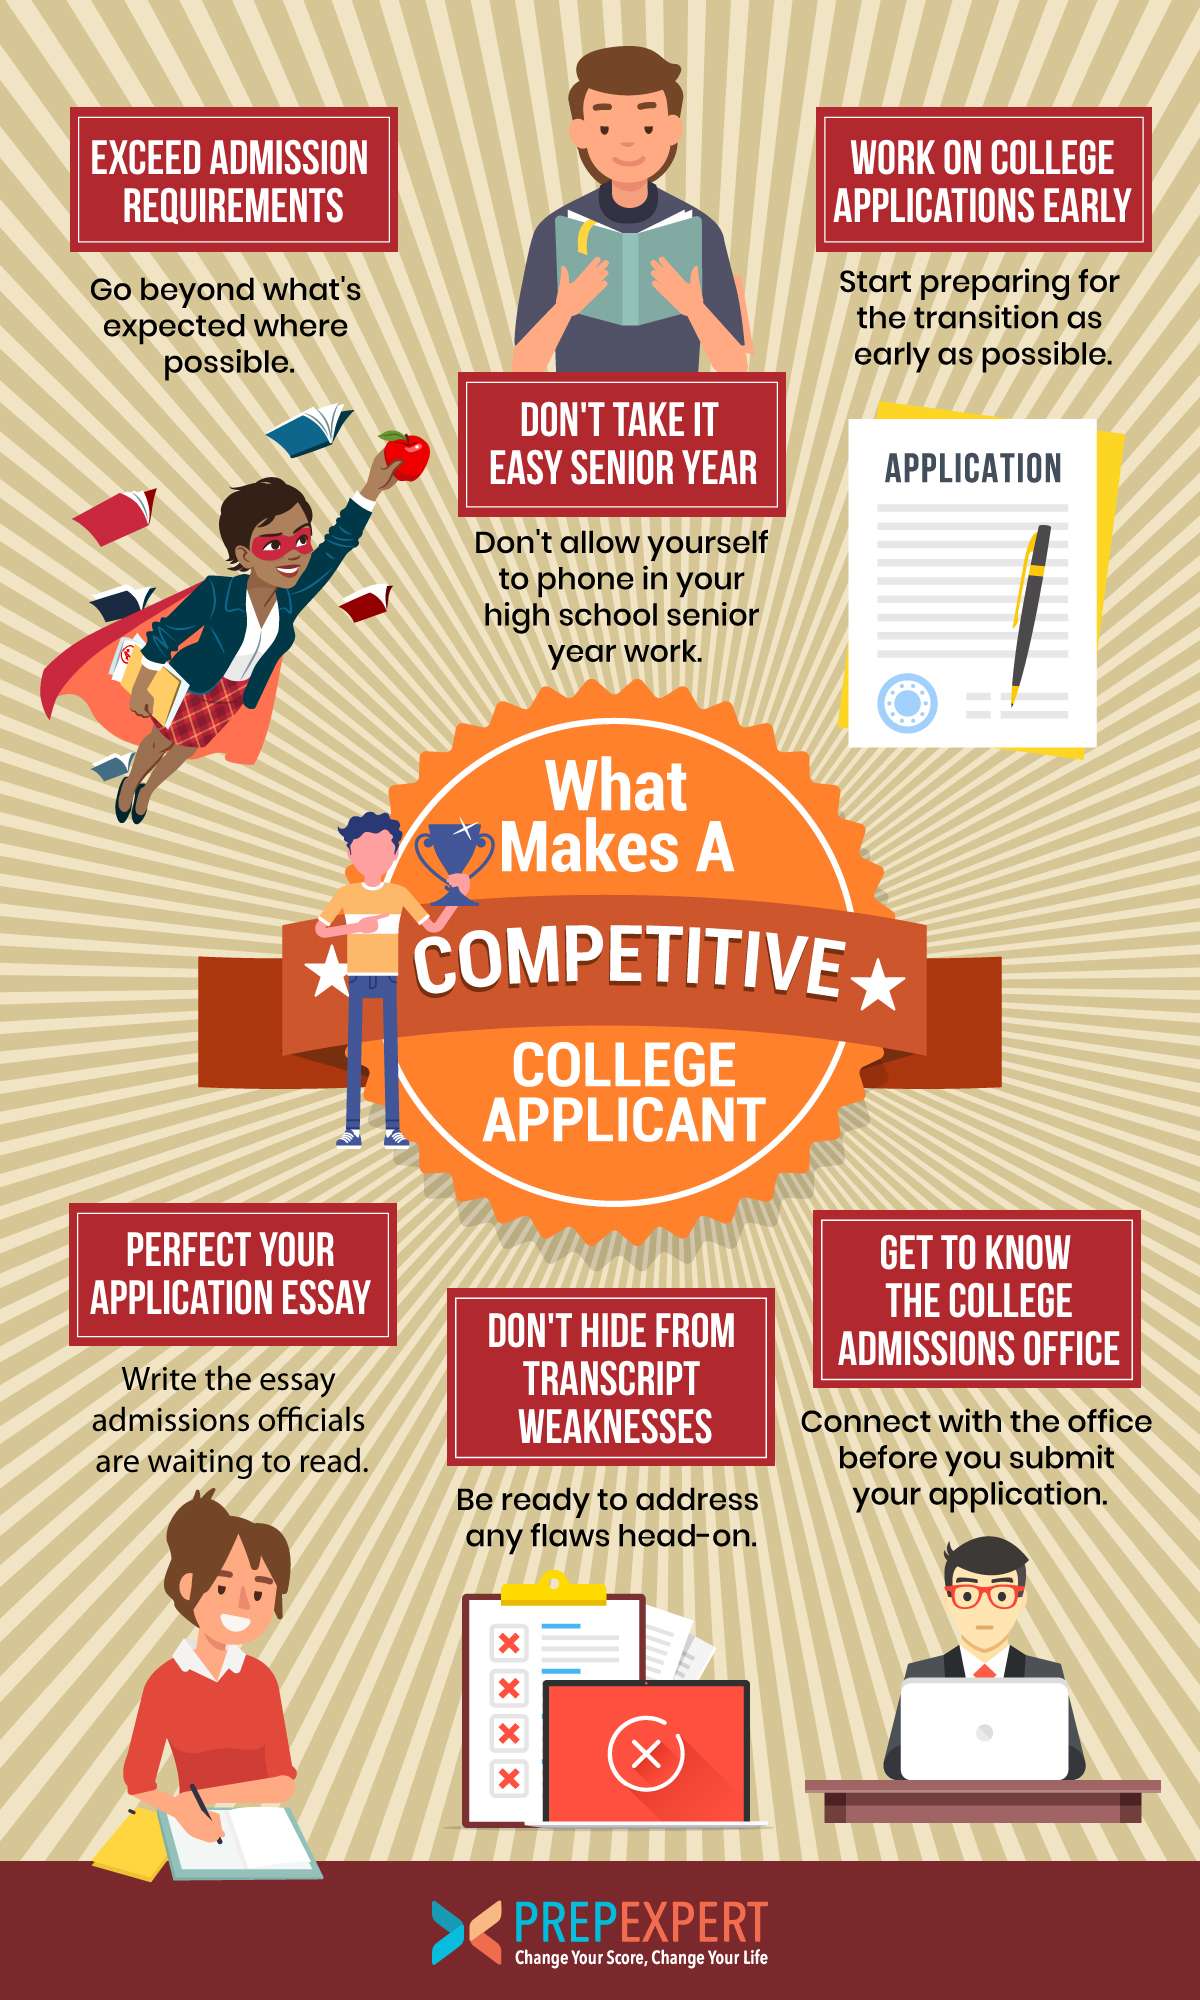 What Makes A Competitive College Applicant